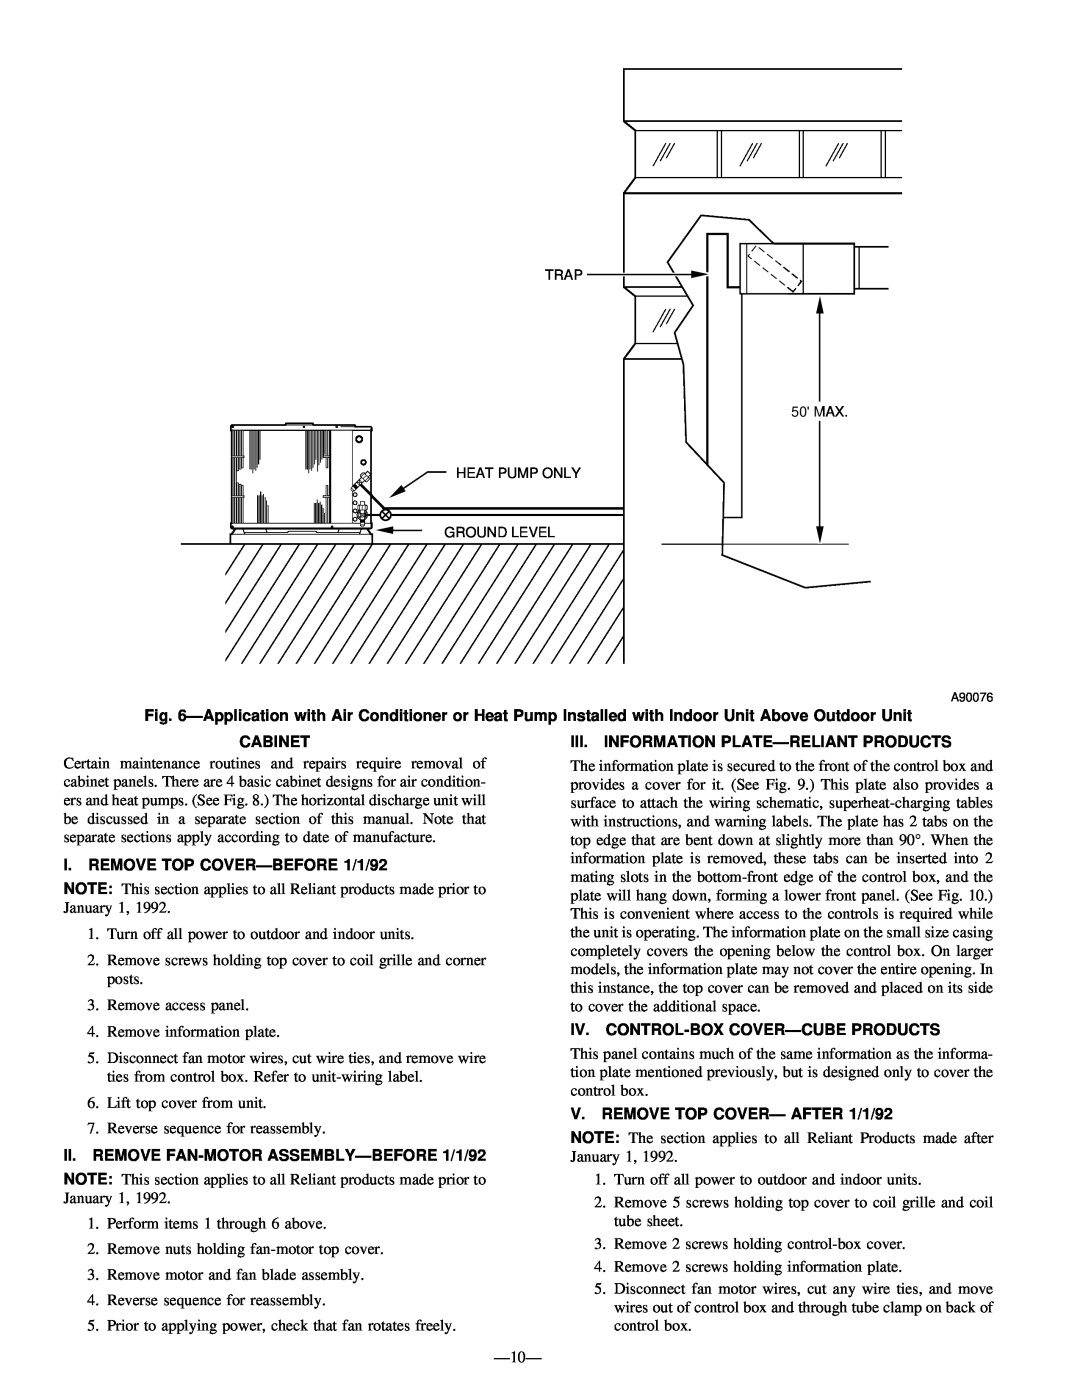 Bryant R-22 service manual Cabinet, I. REMOVE TOP COVER—BEFORE1/1/92, II. REMOVE FAN-MOTOR ASSEMBLY—BEFORE1/1/92 